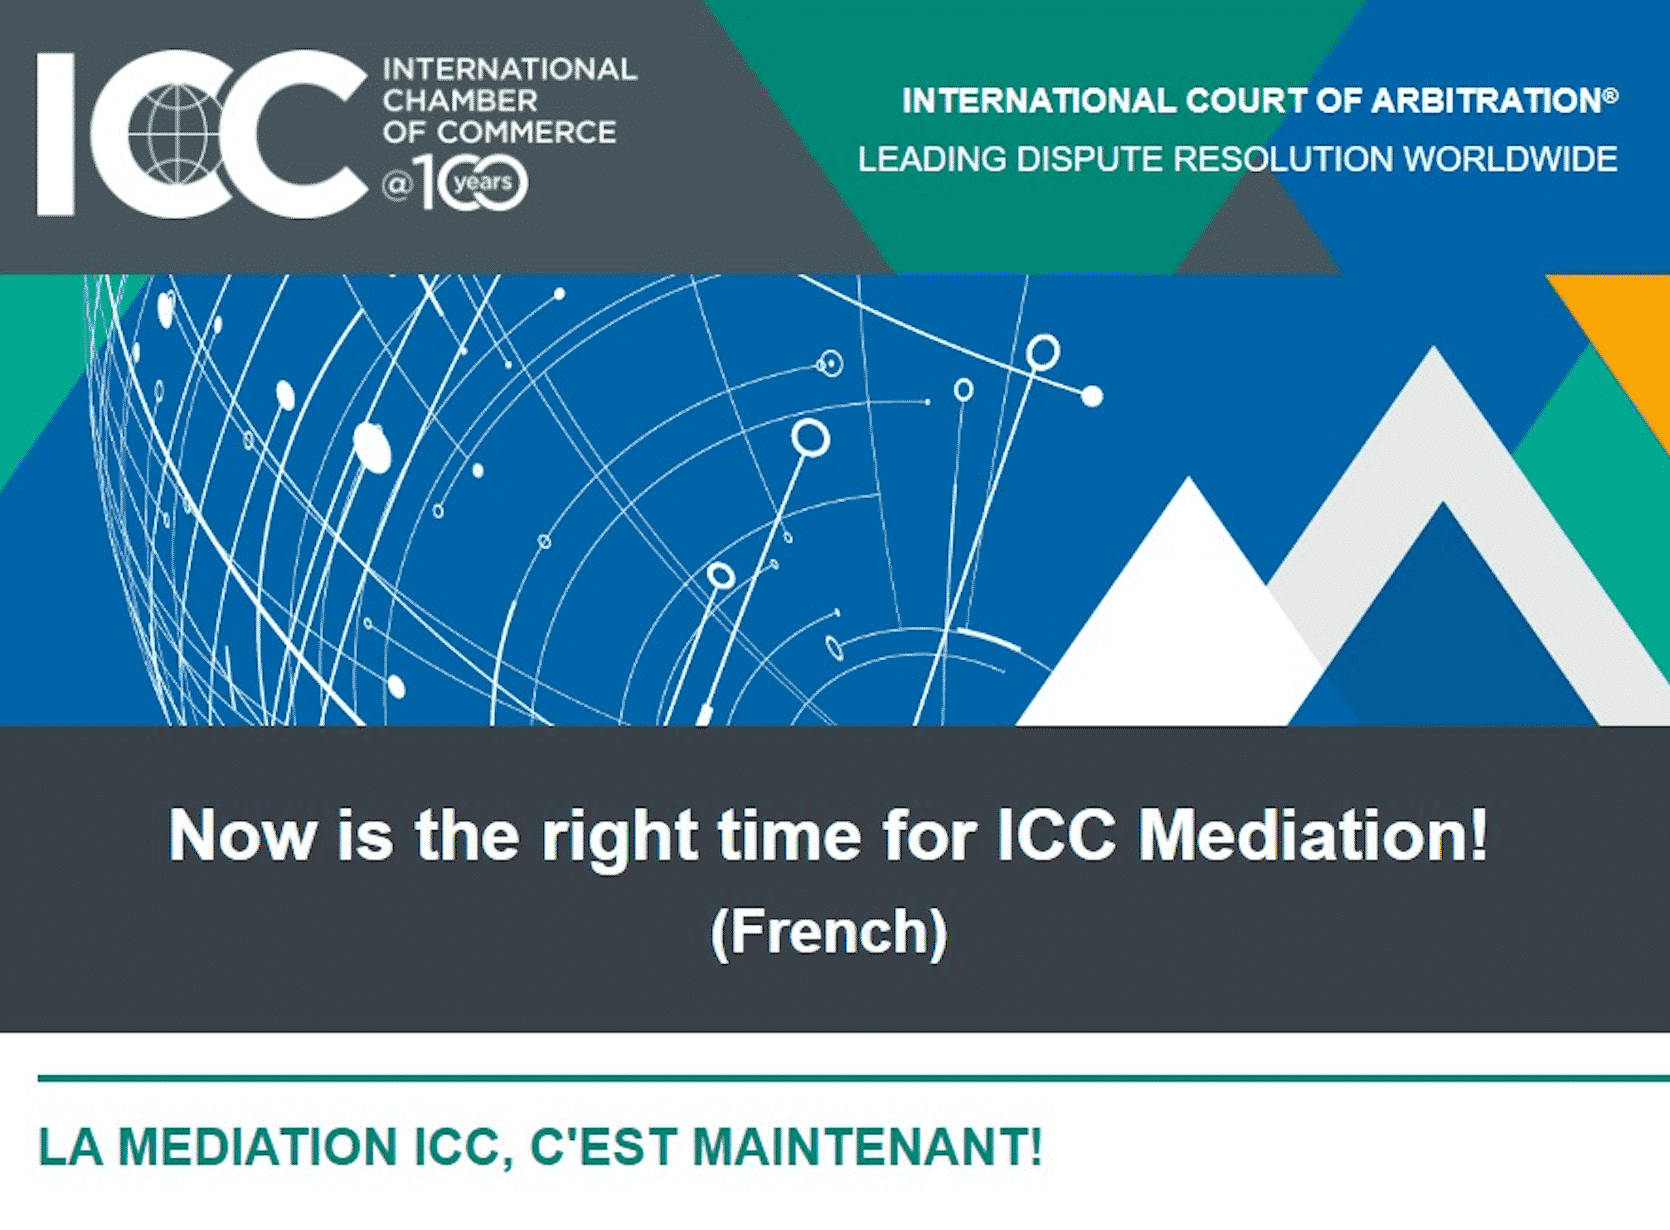 MEDIATION & NEGOTIATION ICC Webinar May 28, 2020 : « Now is the right time for ICC mediation! » « La médiation ICC, c’est maintenant! »